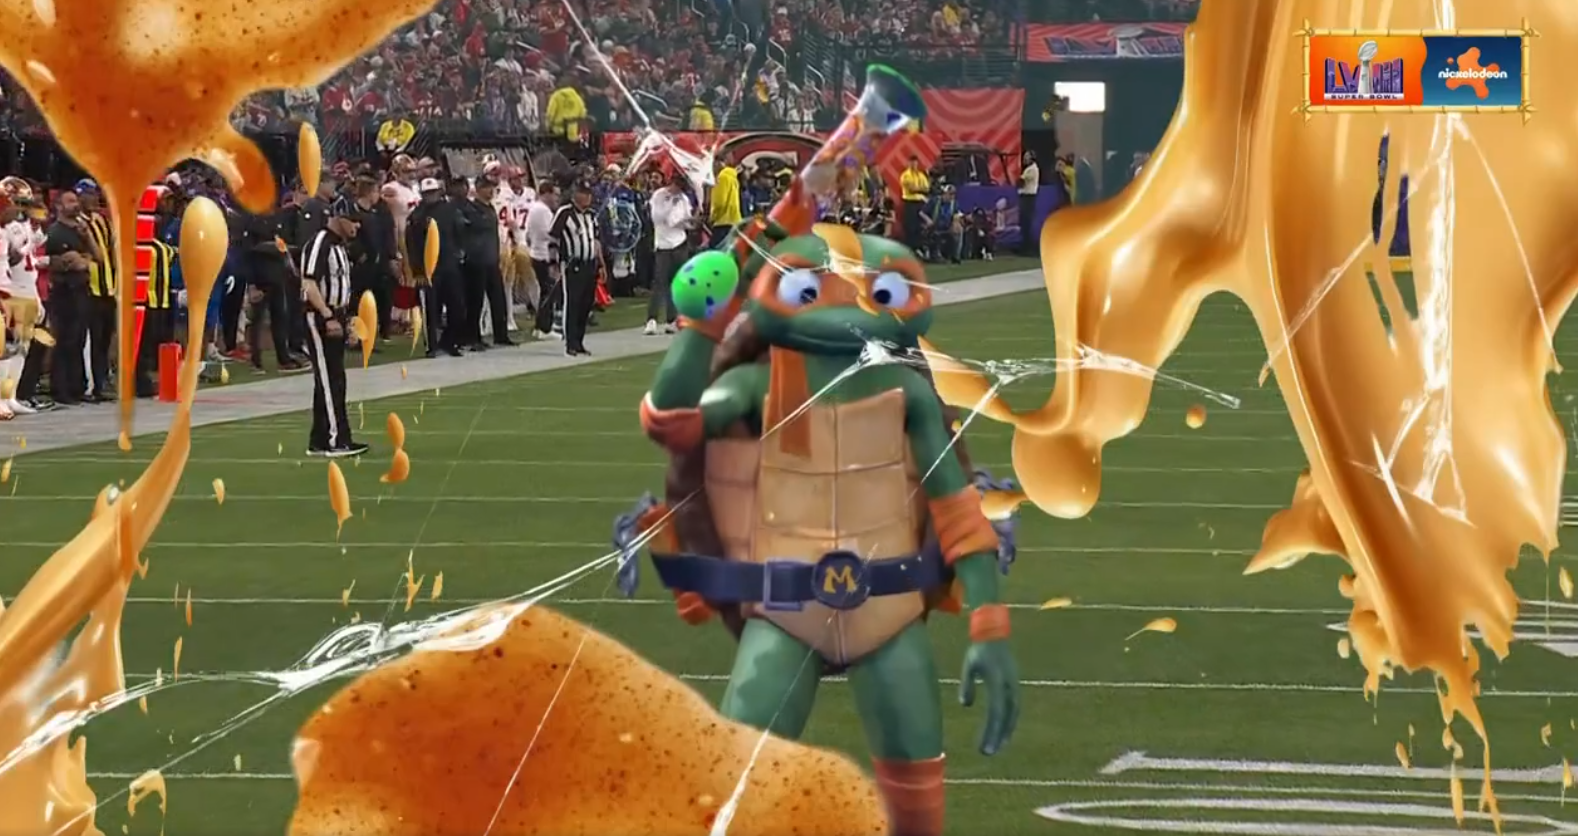 Nickelodeon's Super Bowl broadcast: an ingenious, wildly chaotic splash, Super Bowl